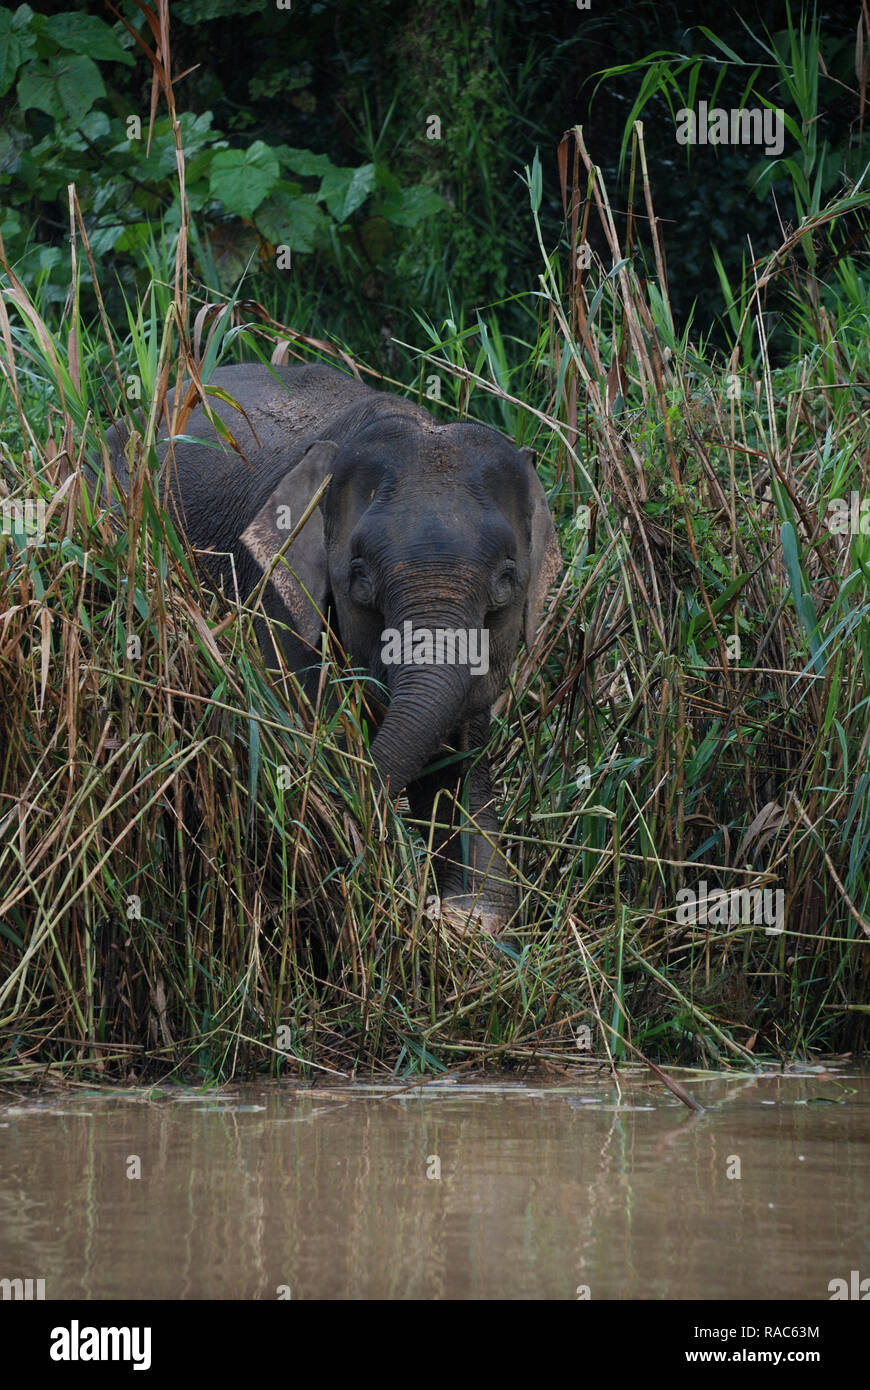 The Borneo elephant, also called the Borneo pygmy elephant, is a subspecies of Asian elephant that inhabits northeastern Borneo, in Malaysia. Stock Photo